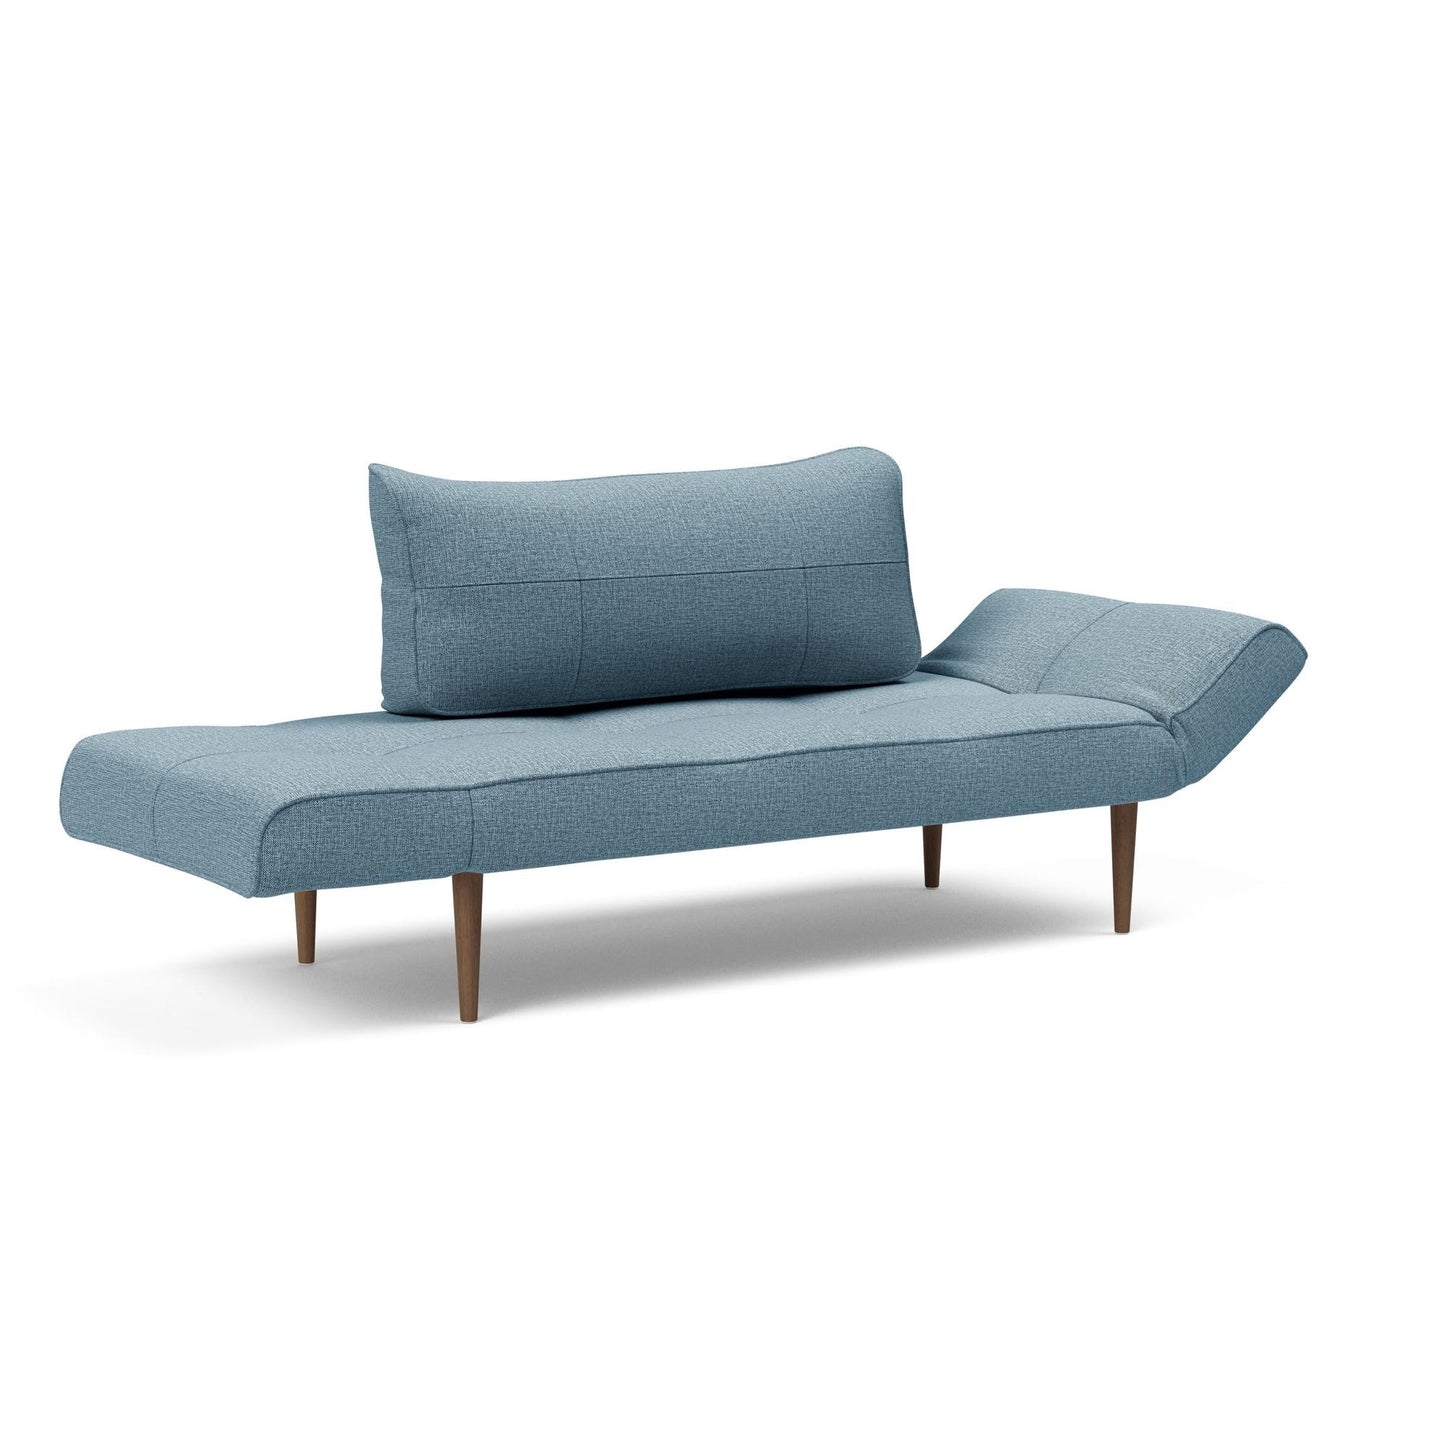 Zeal Deluxe Daybed Sofa Bed in Mixed Dance Light Blue